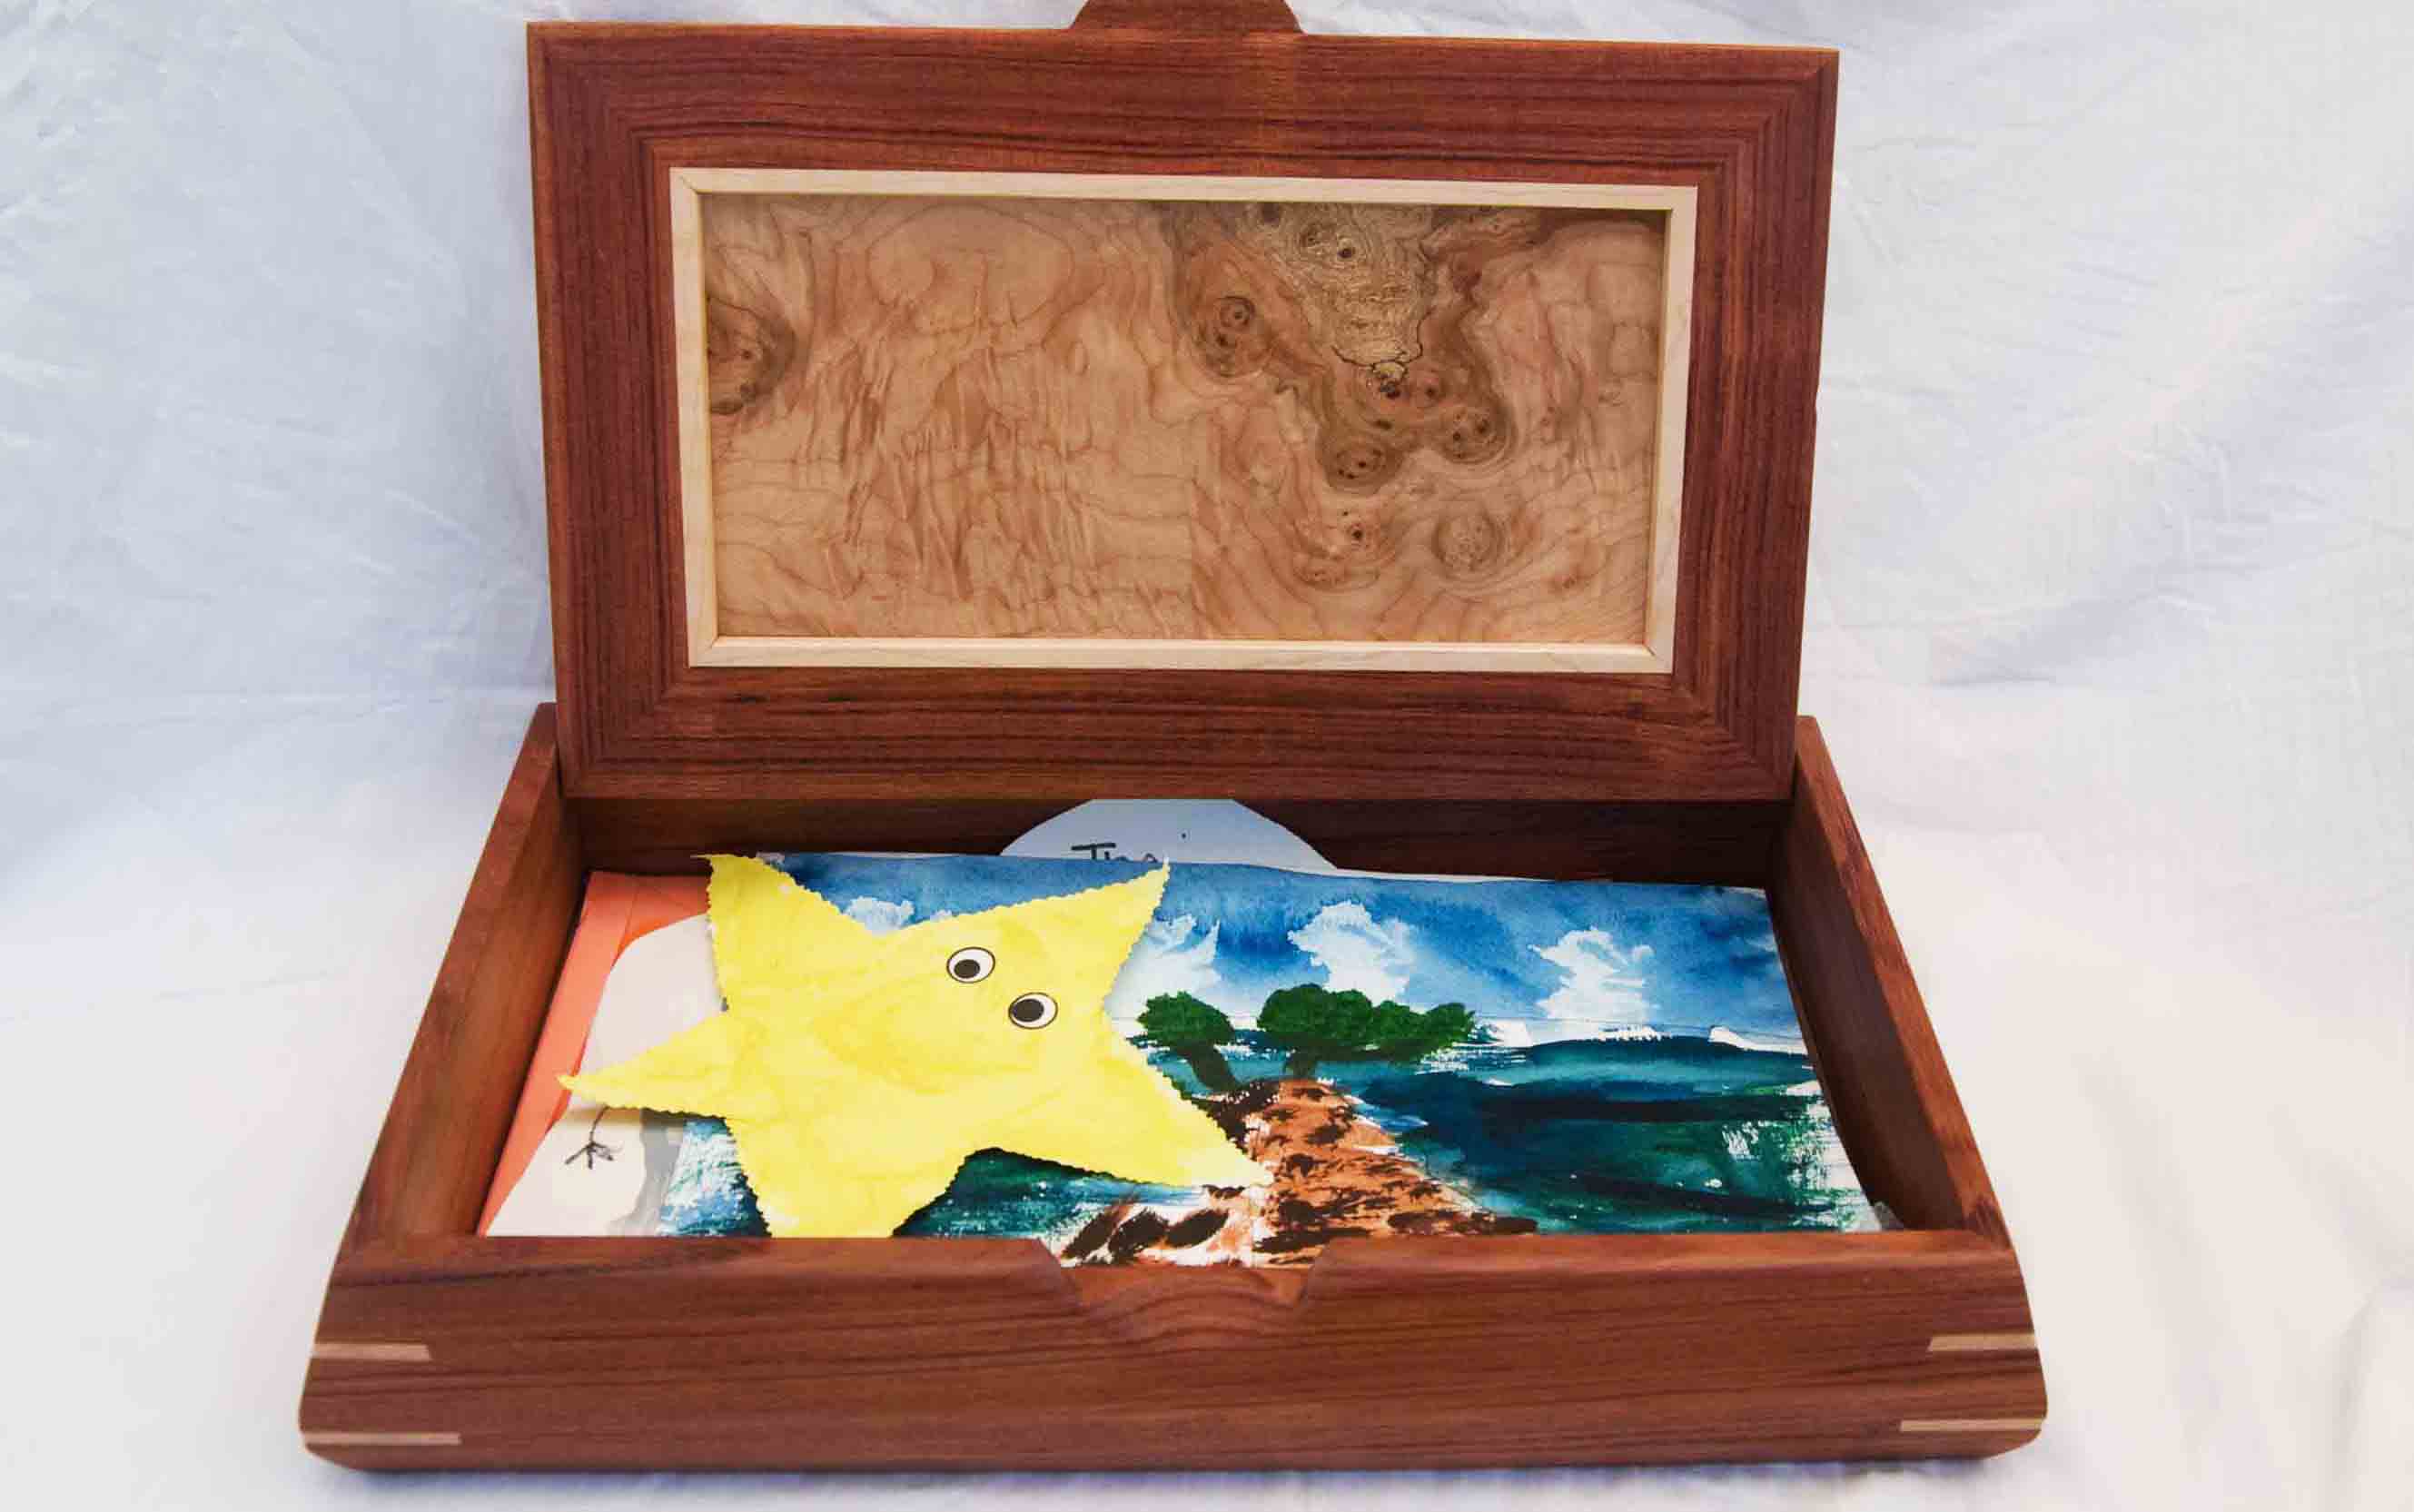 A handmade decorative wooden box is shown open and inside it holds kids art and paintings